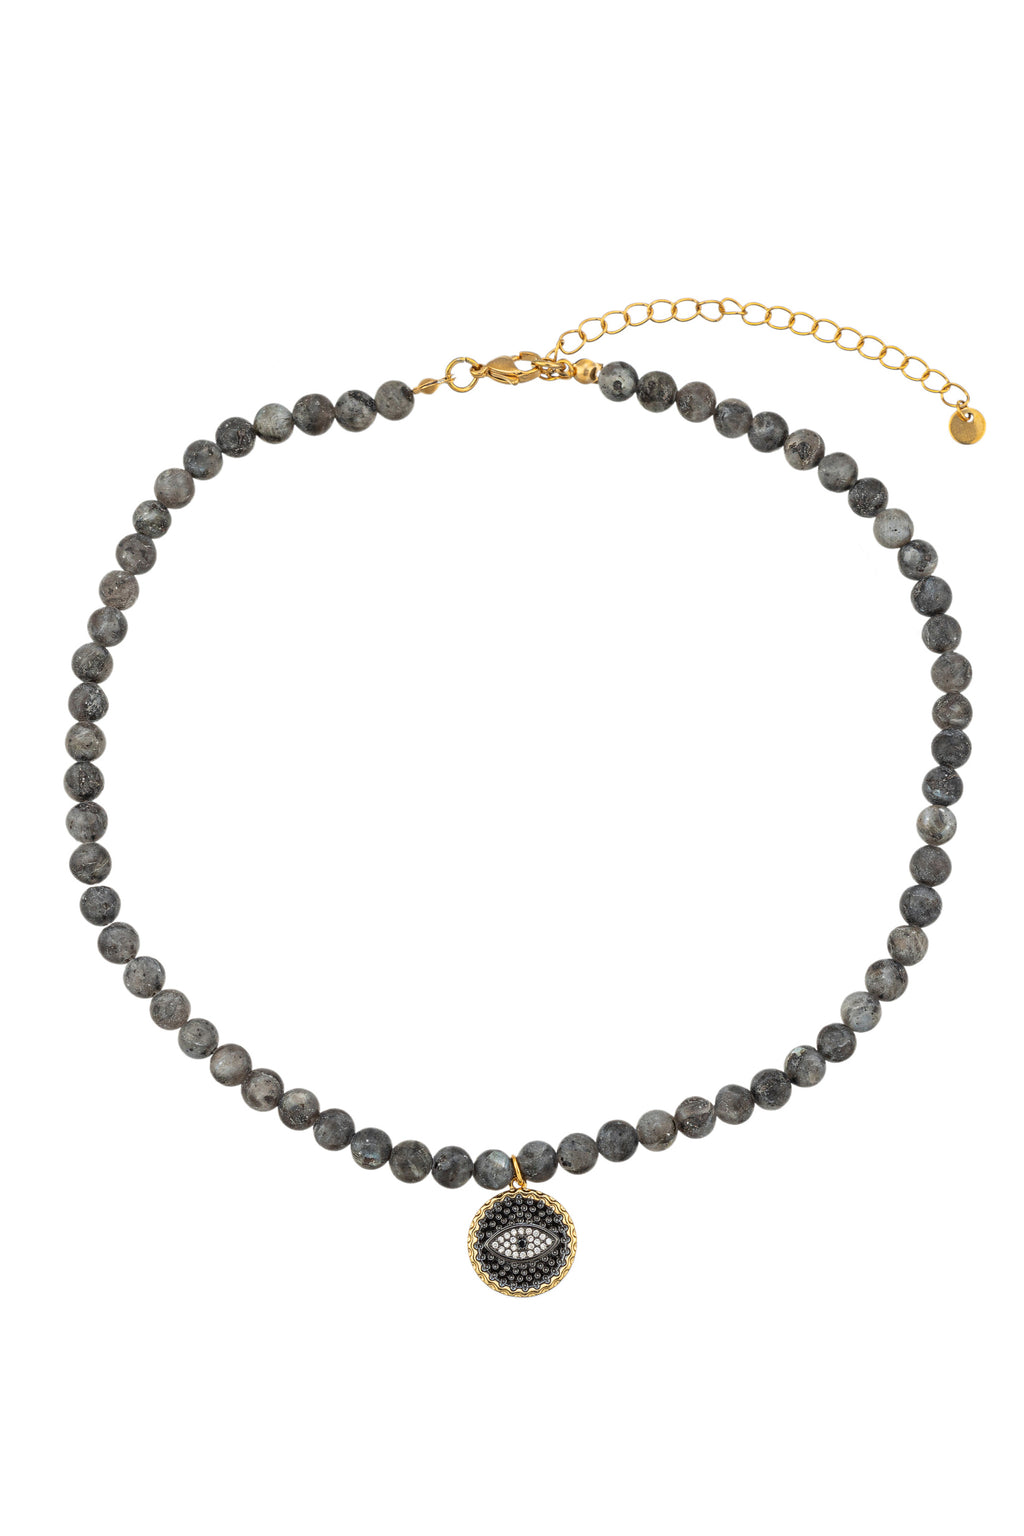 Black agate stone beaded necklace with a CZ crystal evil eye pendant.